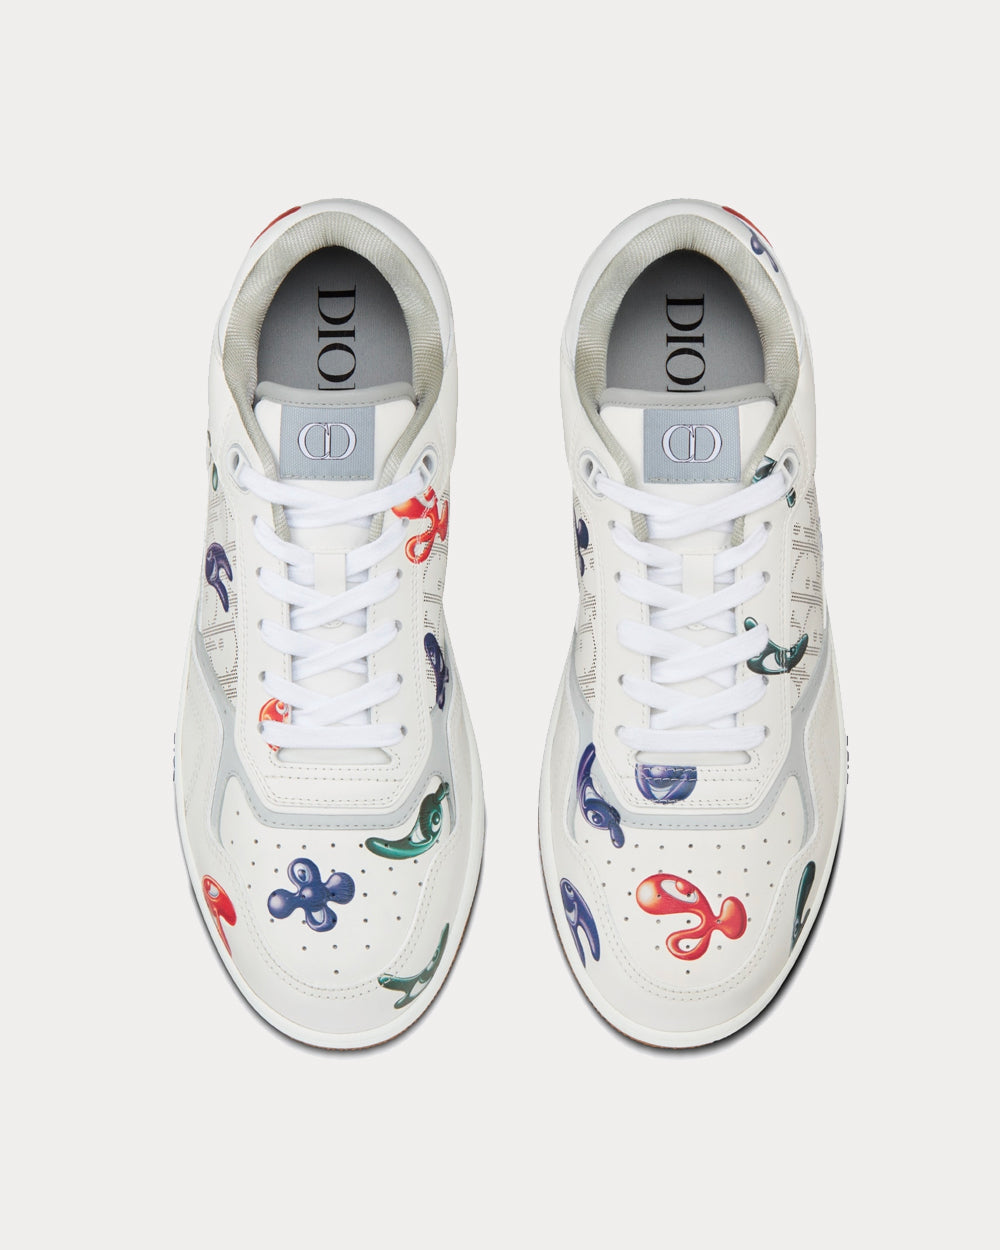 Dior x Kenny Scharf - B27 White Smooth Calfskin with Printed Motif Low Top Sneakers